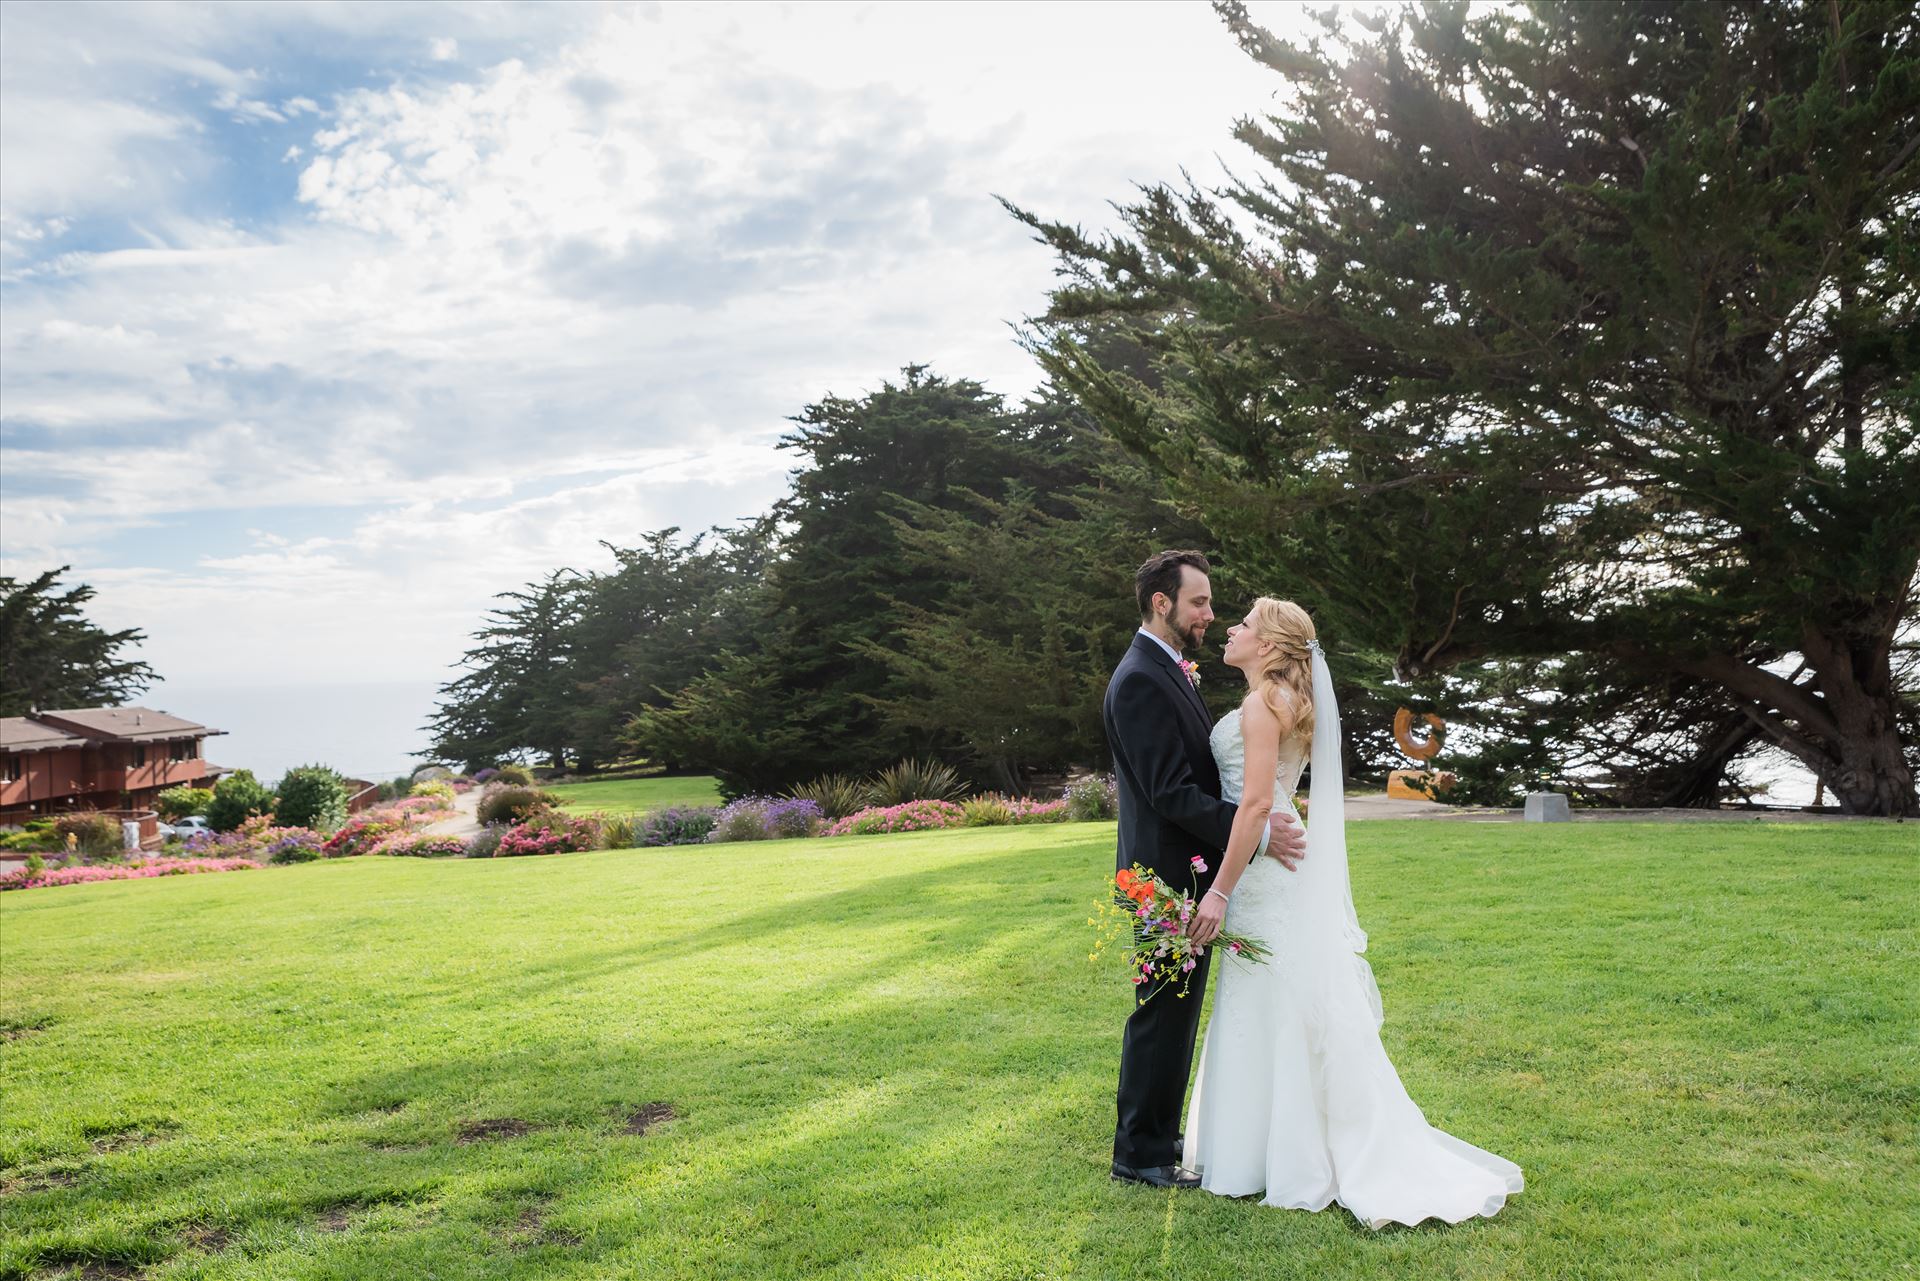 Adele and Jason 50 - Ragged Point Inn Wedding Elopement photography by Mirror's Edge Photography in San Simeon Cambria California. Ragged Point Inn lawn bride and groom. Big Sur Wedding Photography by Sarah Williams